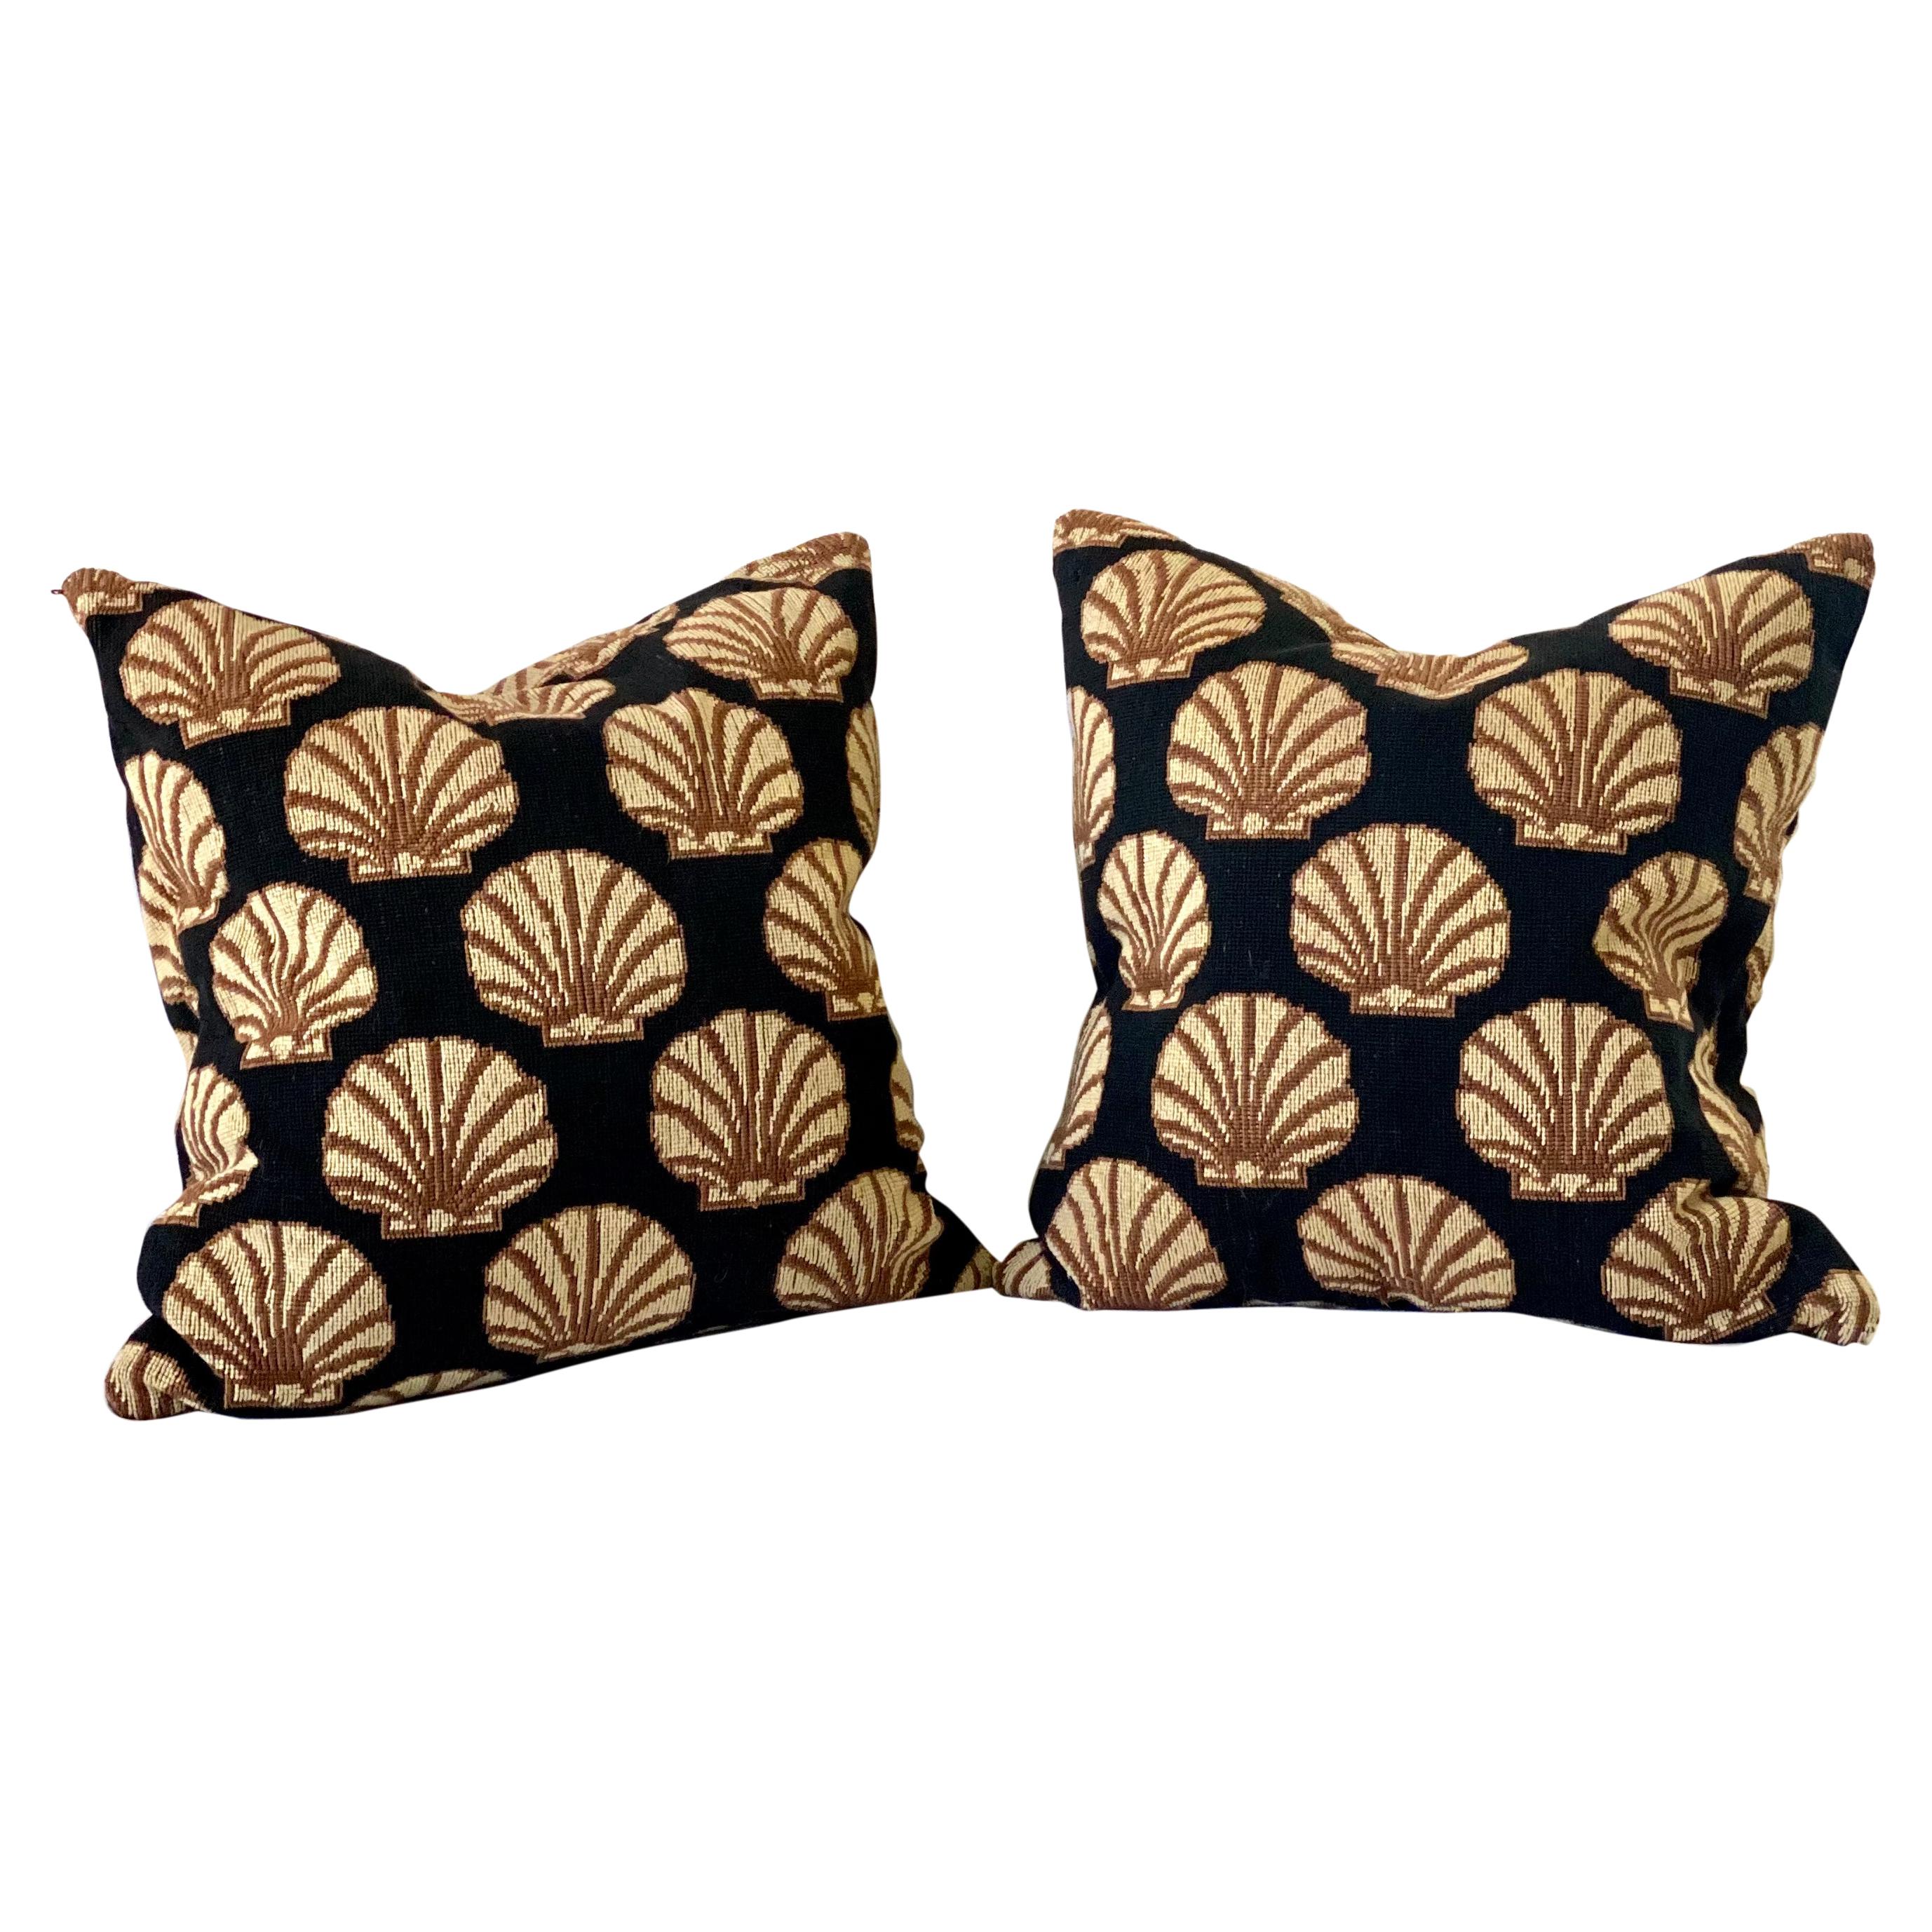 Modern Gros Point Pair of Pillows, in Black with Tan Sea Shell Motive For Sale